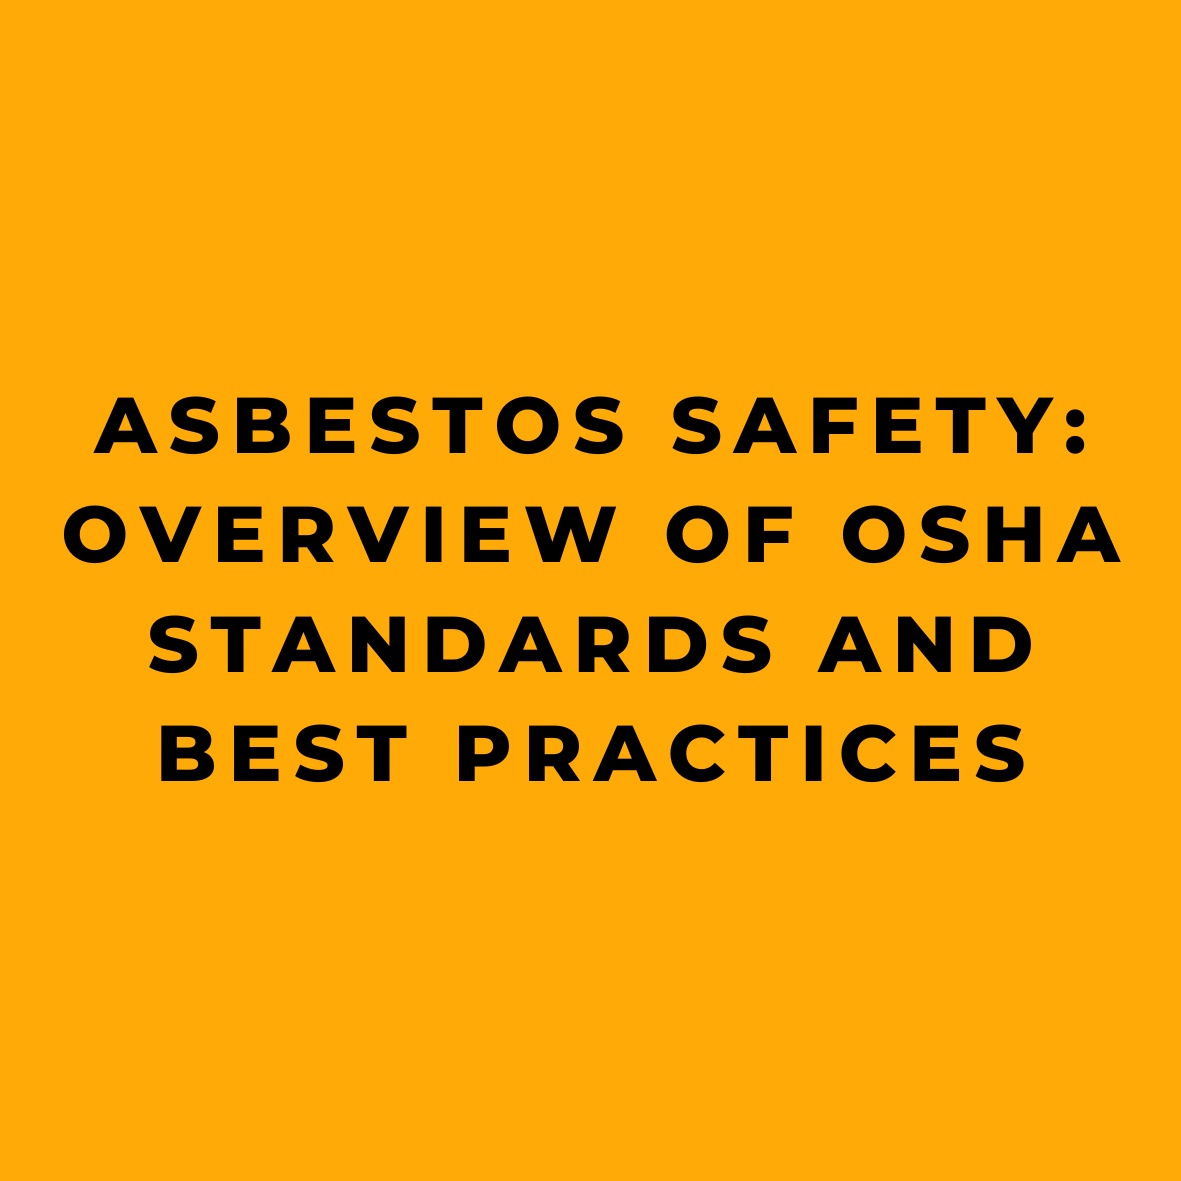 Safe Practices Guide Asbestos-Automotive Brake and Clutch Repair Work